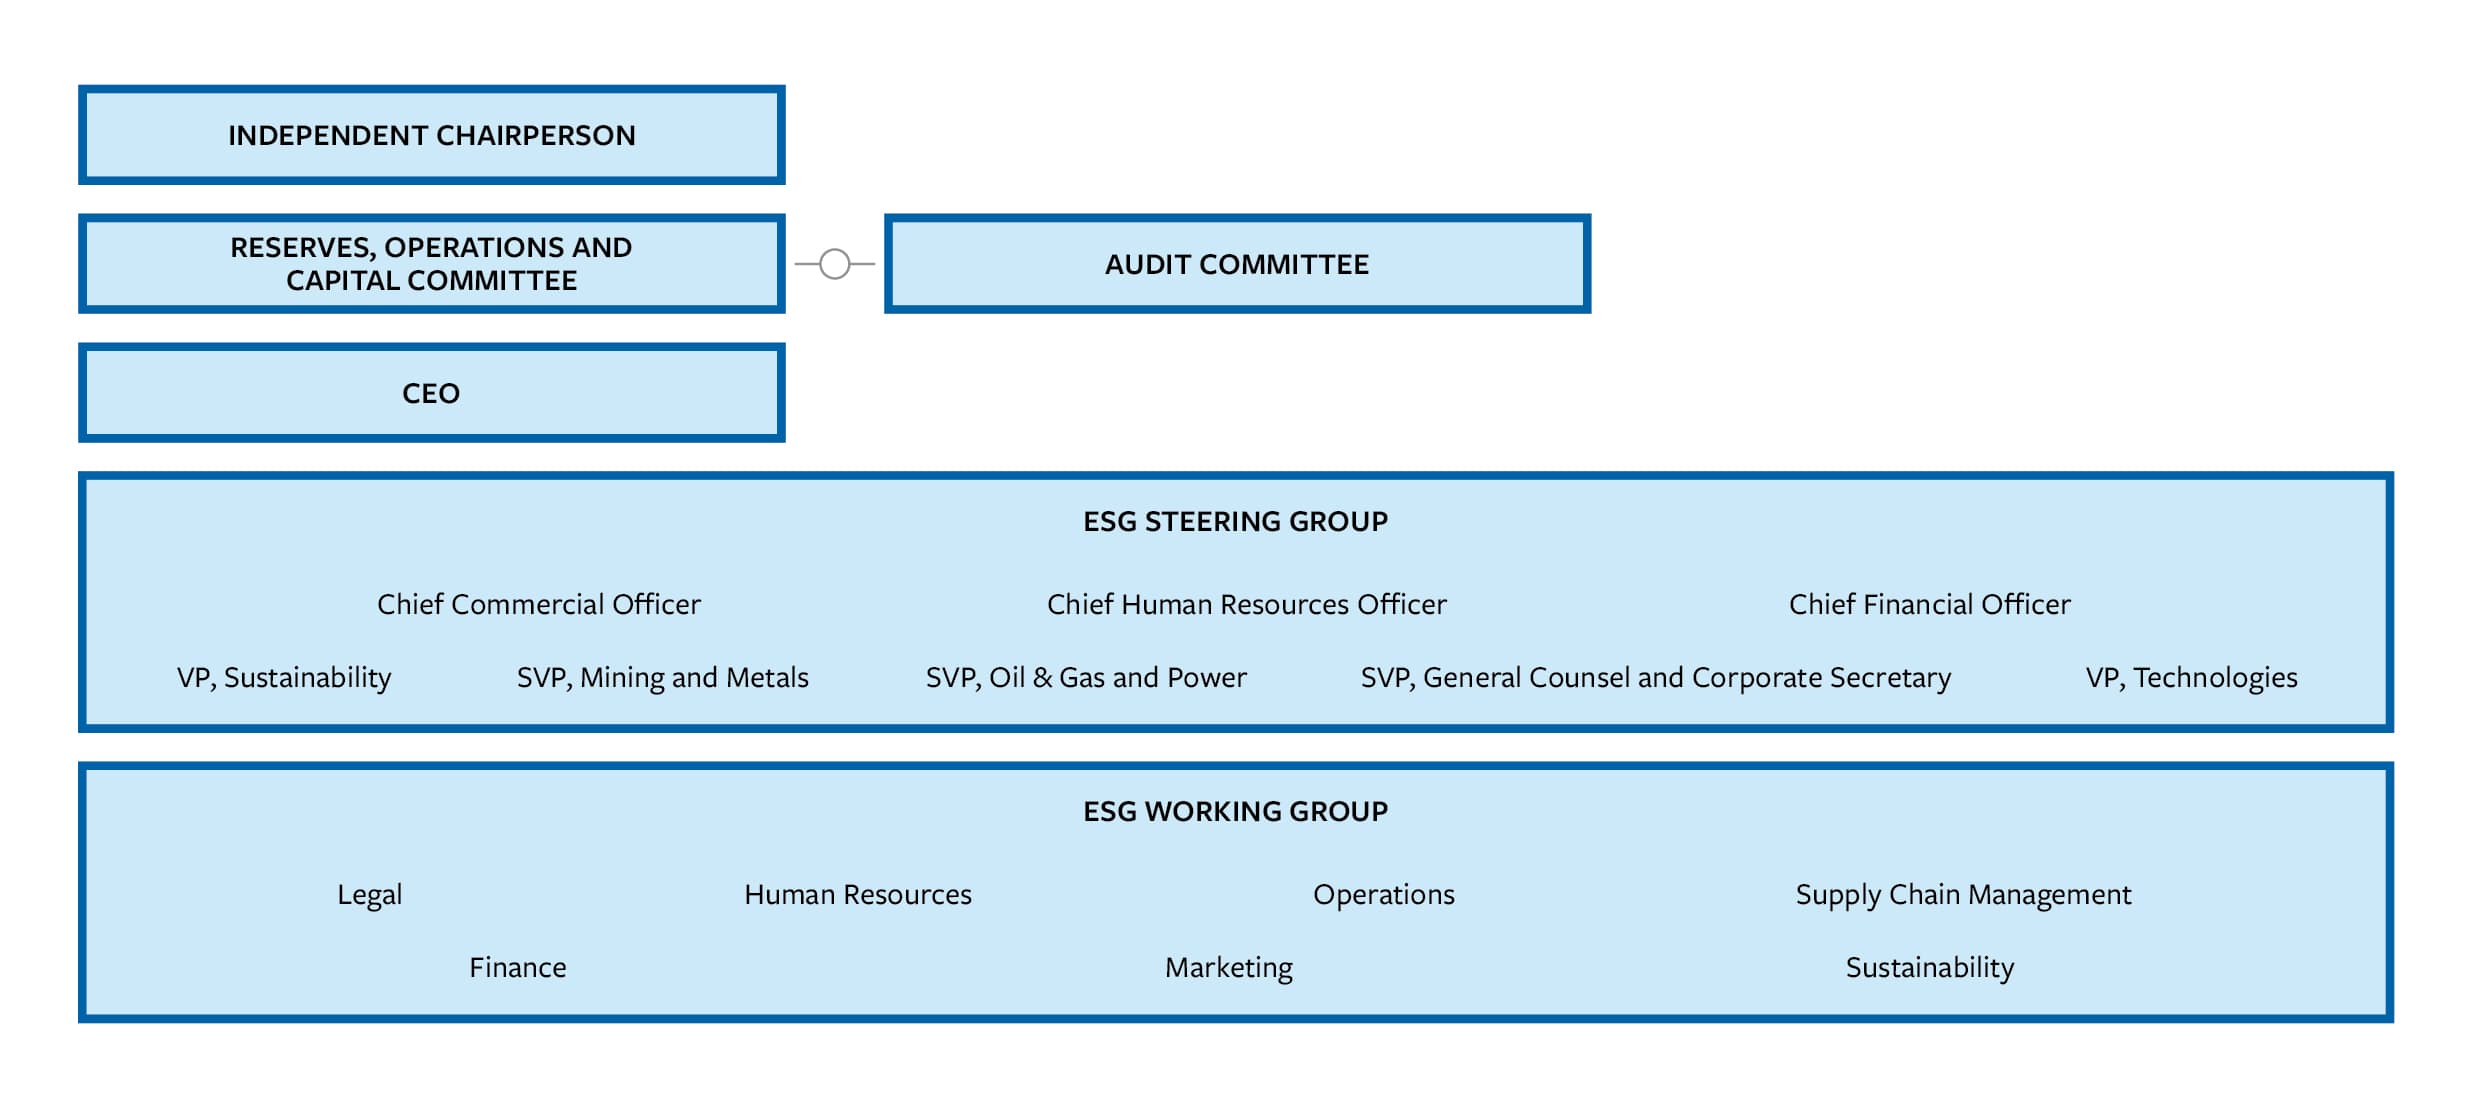 A graphic outlining the reporting structure for Sherritt’s sustainability governance: Top row: independent chairperson; second row: Reserves, Operations and Capital Committee – Human Resources Committee – Audit Committee; third row: CEO; fourth row: ESG Steering Group, which includes the following roles: Chief Commercial Officer, Chief Human Resources Officer, Chief Financial Officer, VP of Sustainability, SVP of Mining and Metals, SVP of Oil & Gas and Power, SVP – General Counsel and Corporate Security, VP of Technologies; fifth row: ESG Working Group, which includes the following departments: Legal, Human resources, Operations, Supply Chain Management, Finance, Marketing, Sustainability